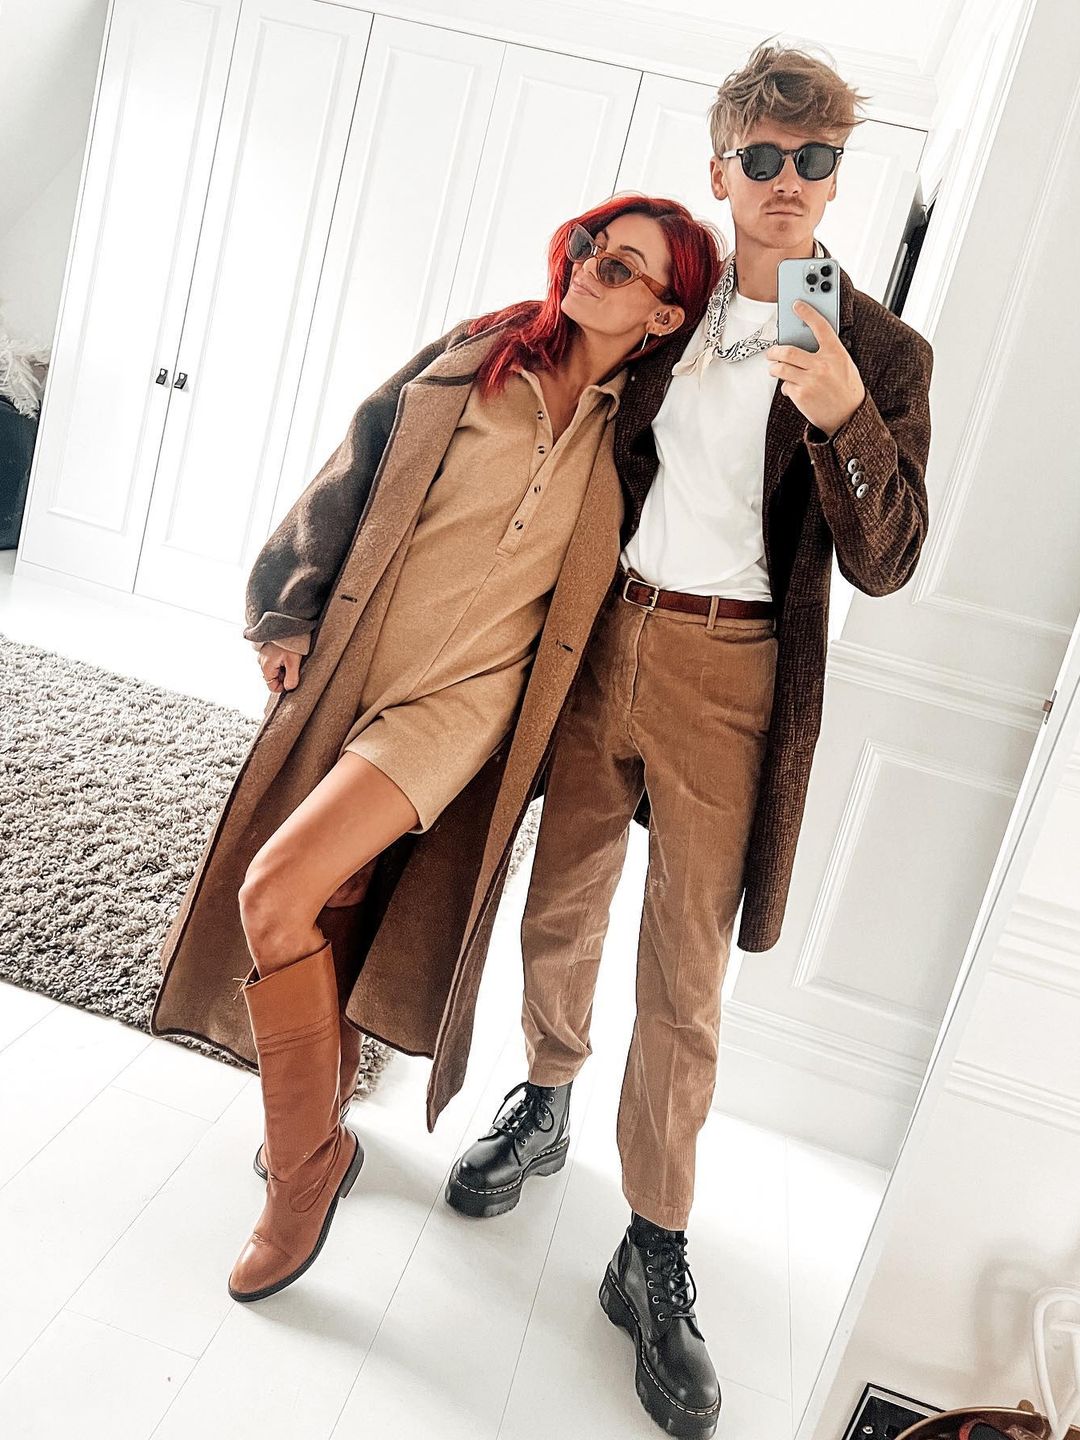 Dianne Buswell and Joe Sugg posing in front of a mirror in matching clothes